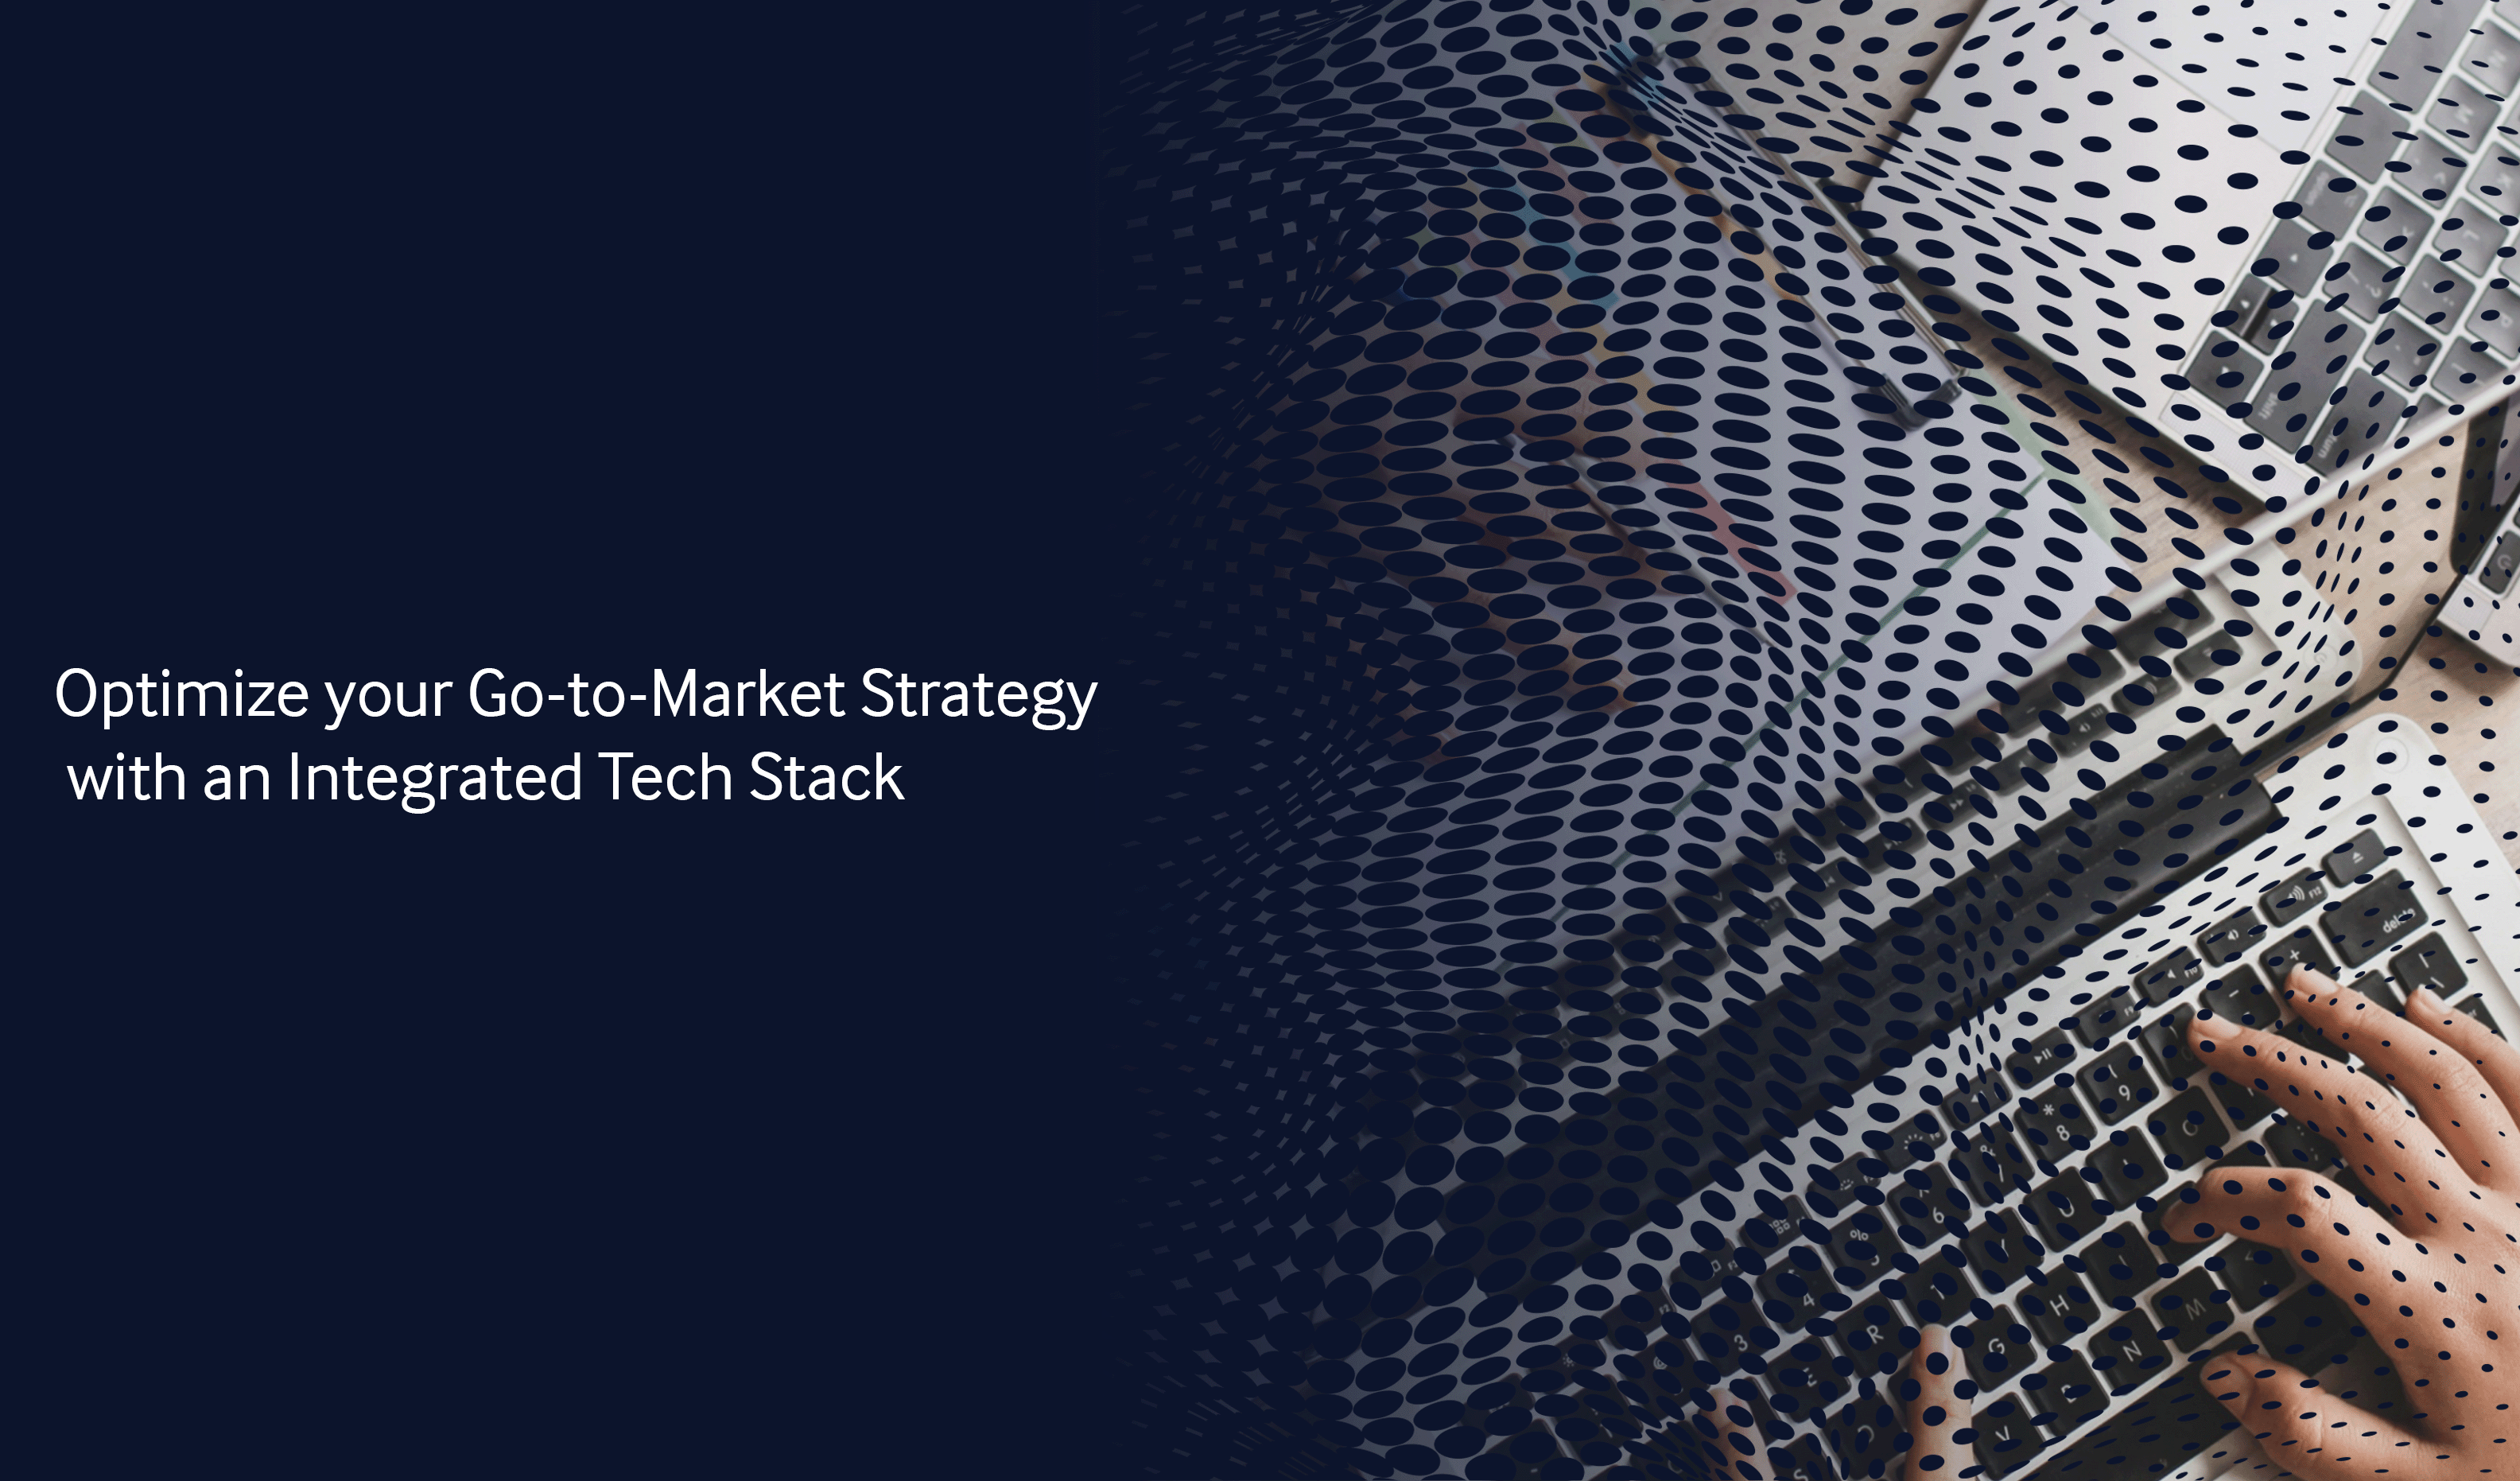 Optimize your Go-to-Market Strategy with an Integrated Tech Stack